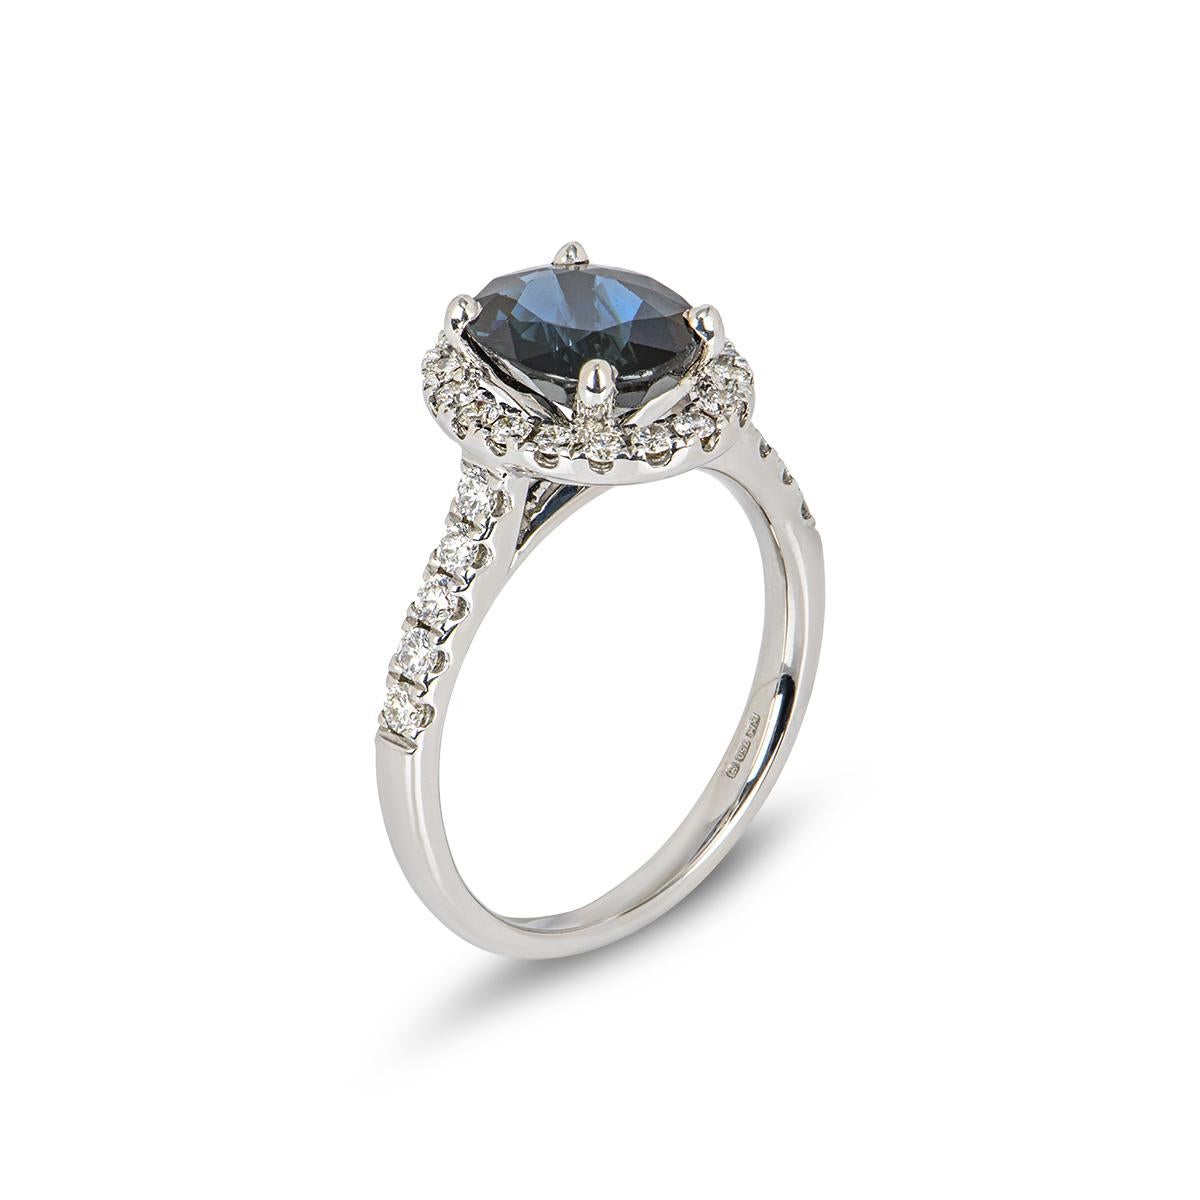 A sapphire and diamond cluster ring set in 18k white gold. This vintage inspired design is set to the centre with an oval faceted sapphire, claw set within a diamond halo surround and diamond set shoulders. The 28 round brilliant cut diamonds total